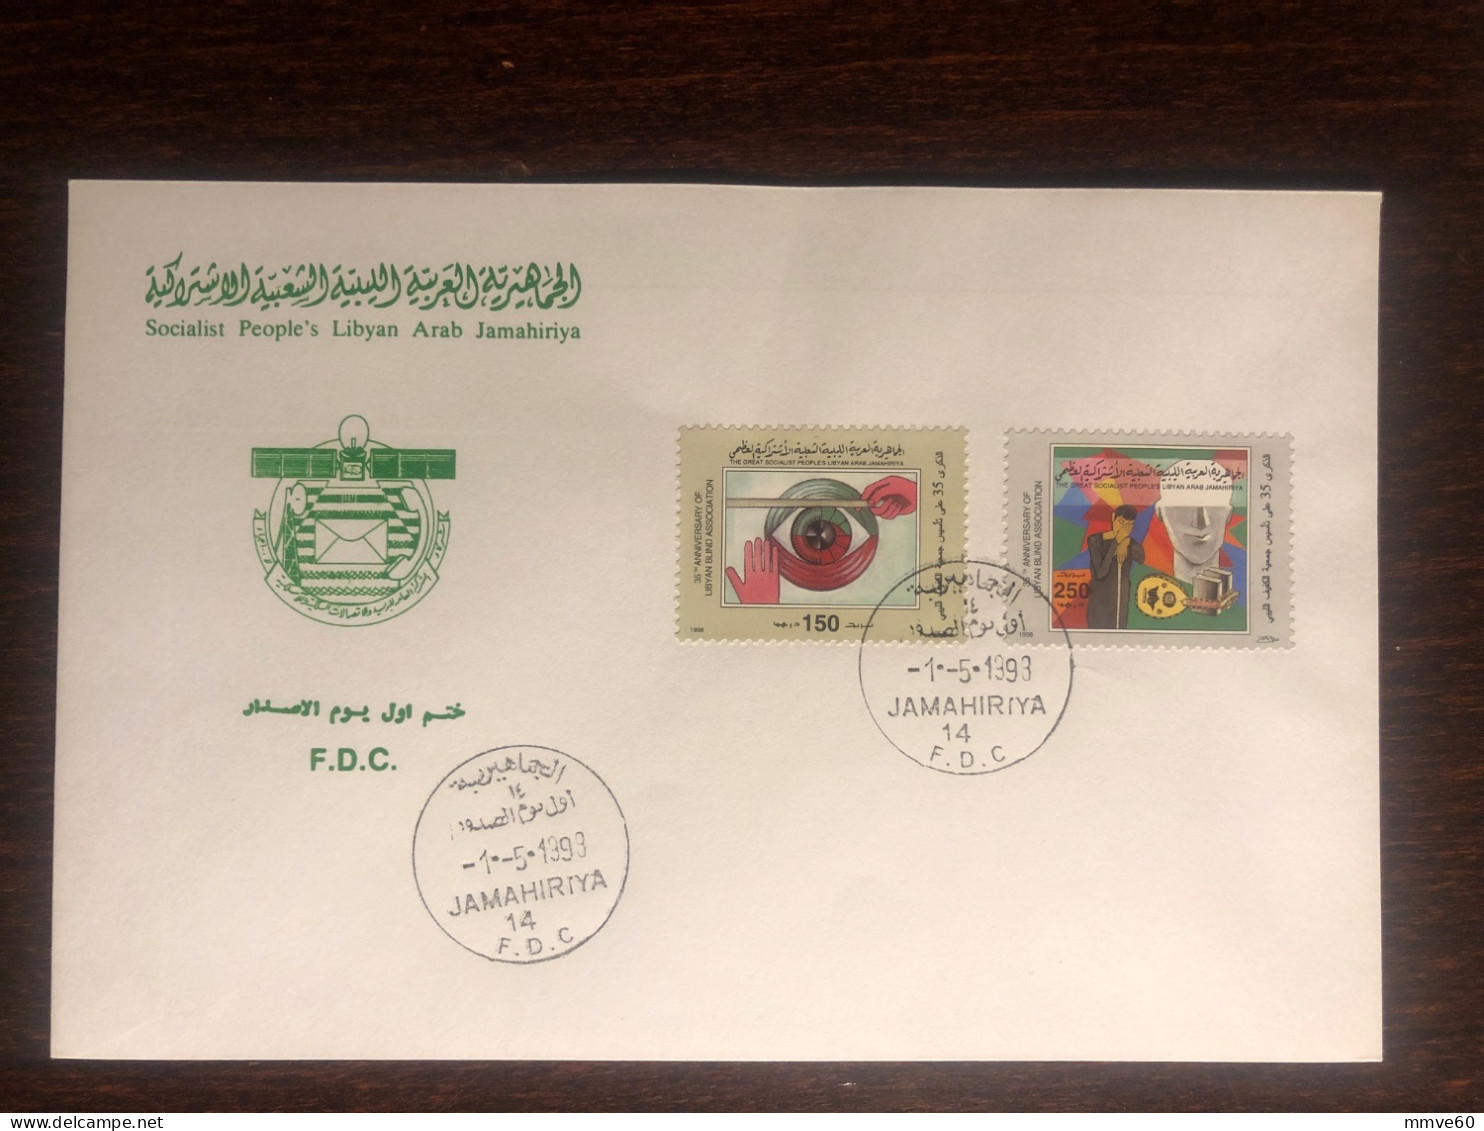 LIBYA  FDC COVER 1998 YEAR BLINDNESS BLIND HEALTH MEDICINE STAMPS - Libia